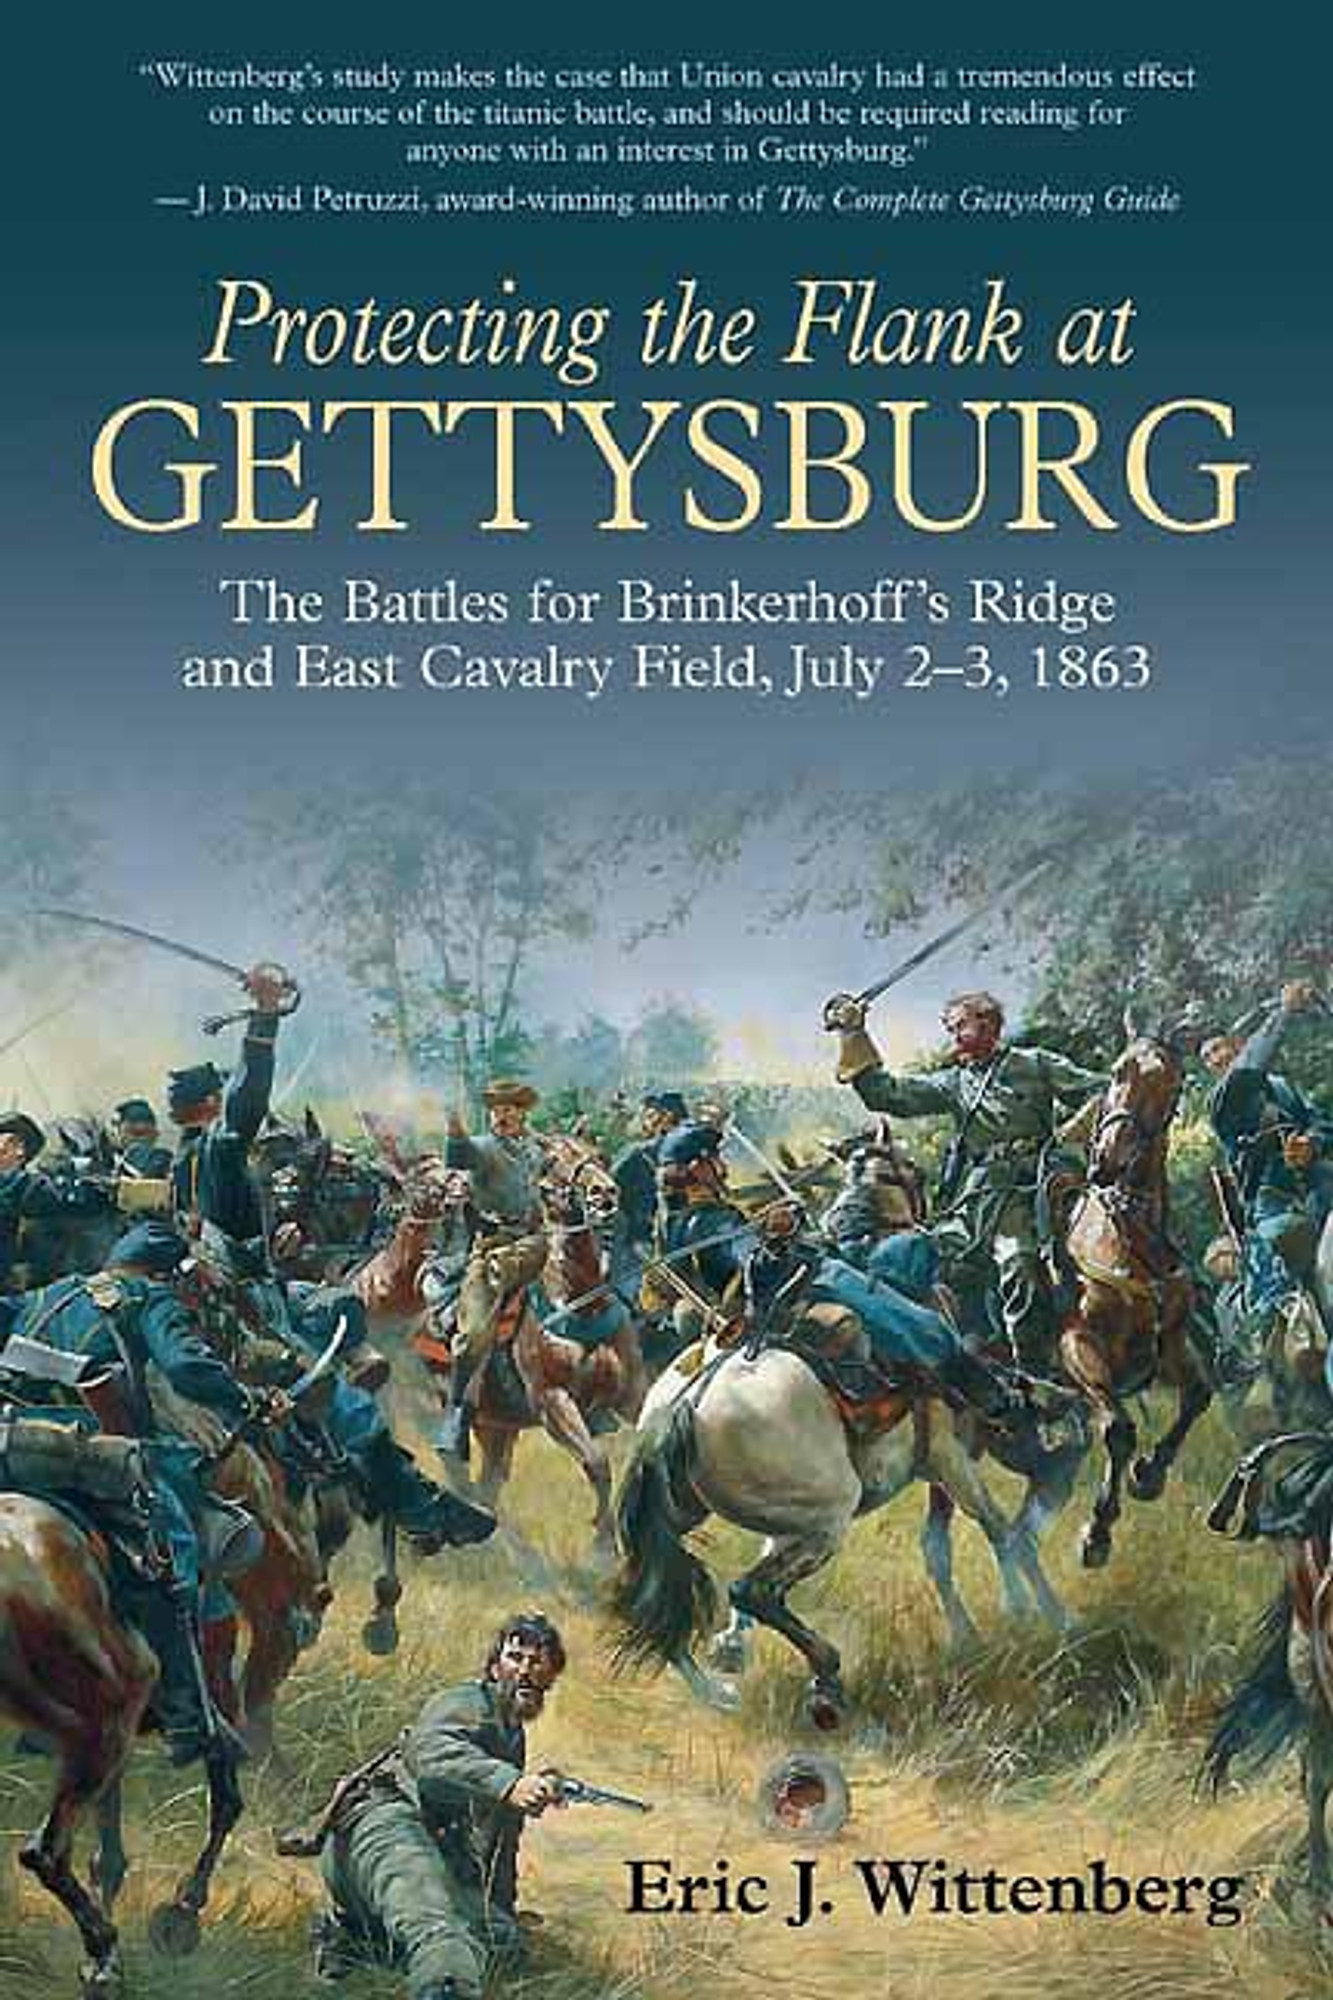 Protecting the Flank at Gettysburg: The Battles for Brinkerhoff's Ridge and East Cavalry Field, July 2–3, 1863 - Savas Beatie